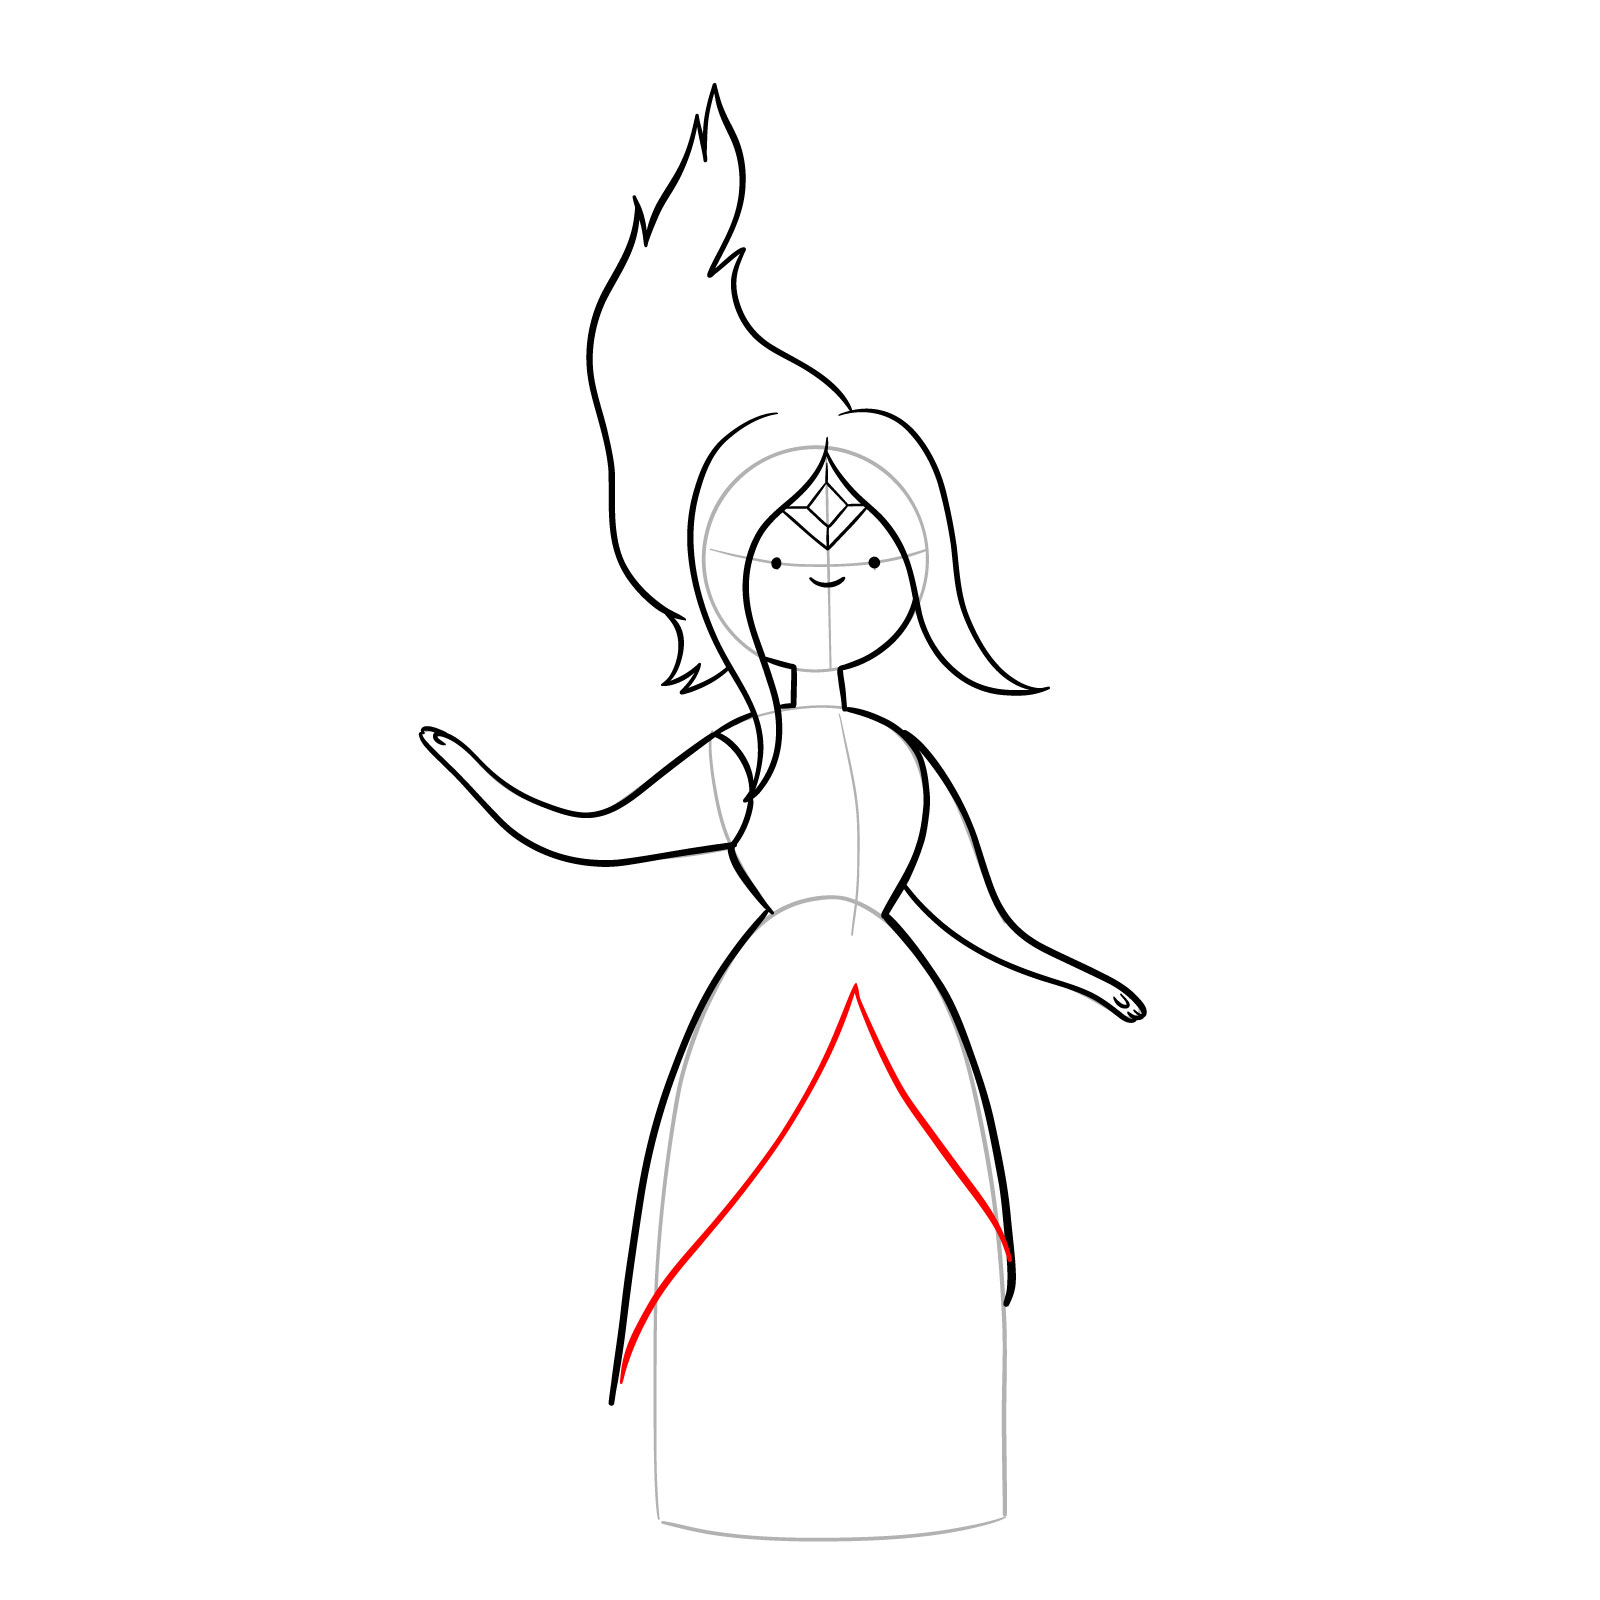 How to draw Flame Princess from Incendium Episode - step 14